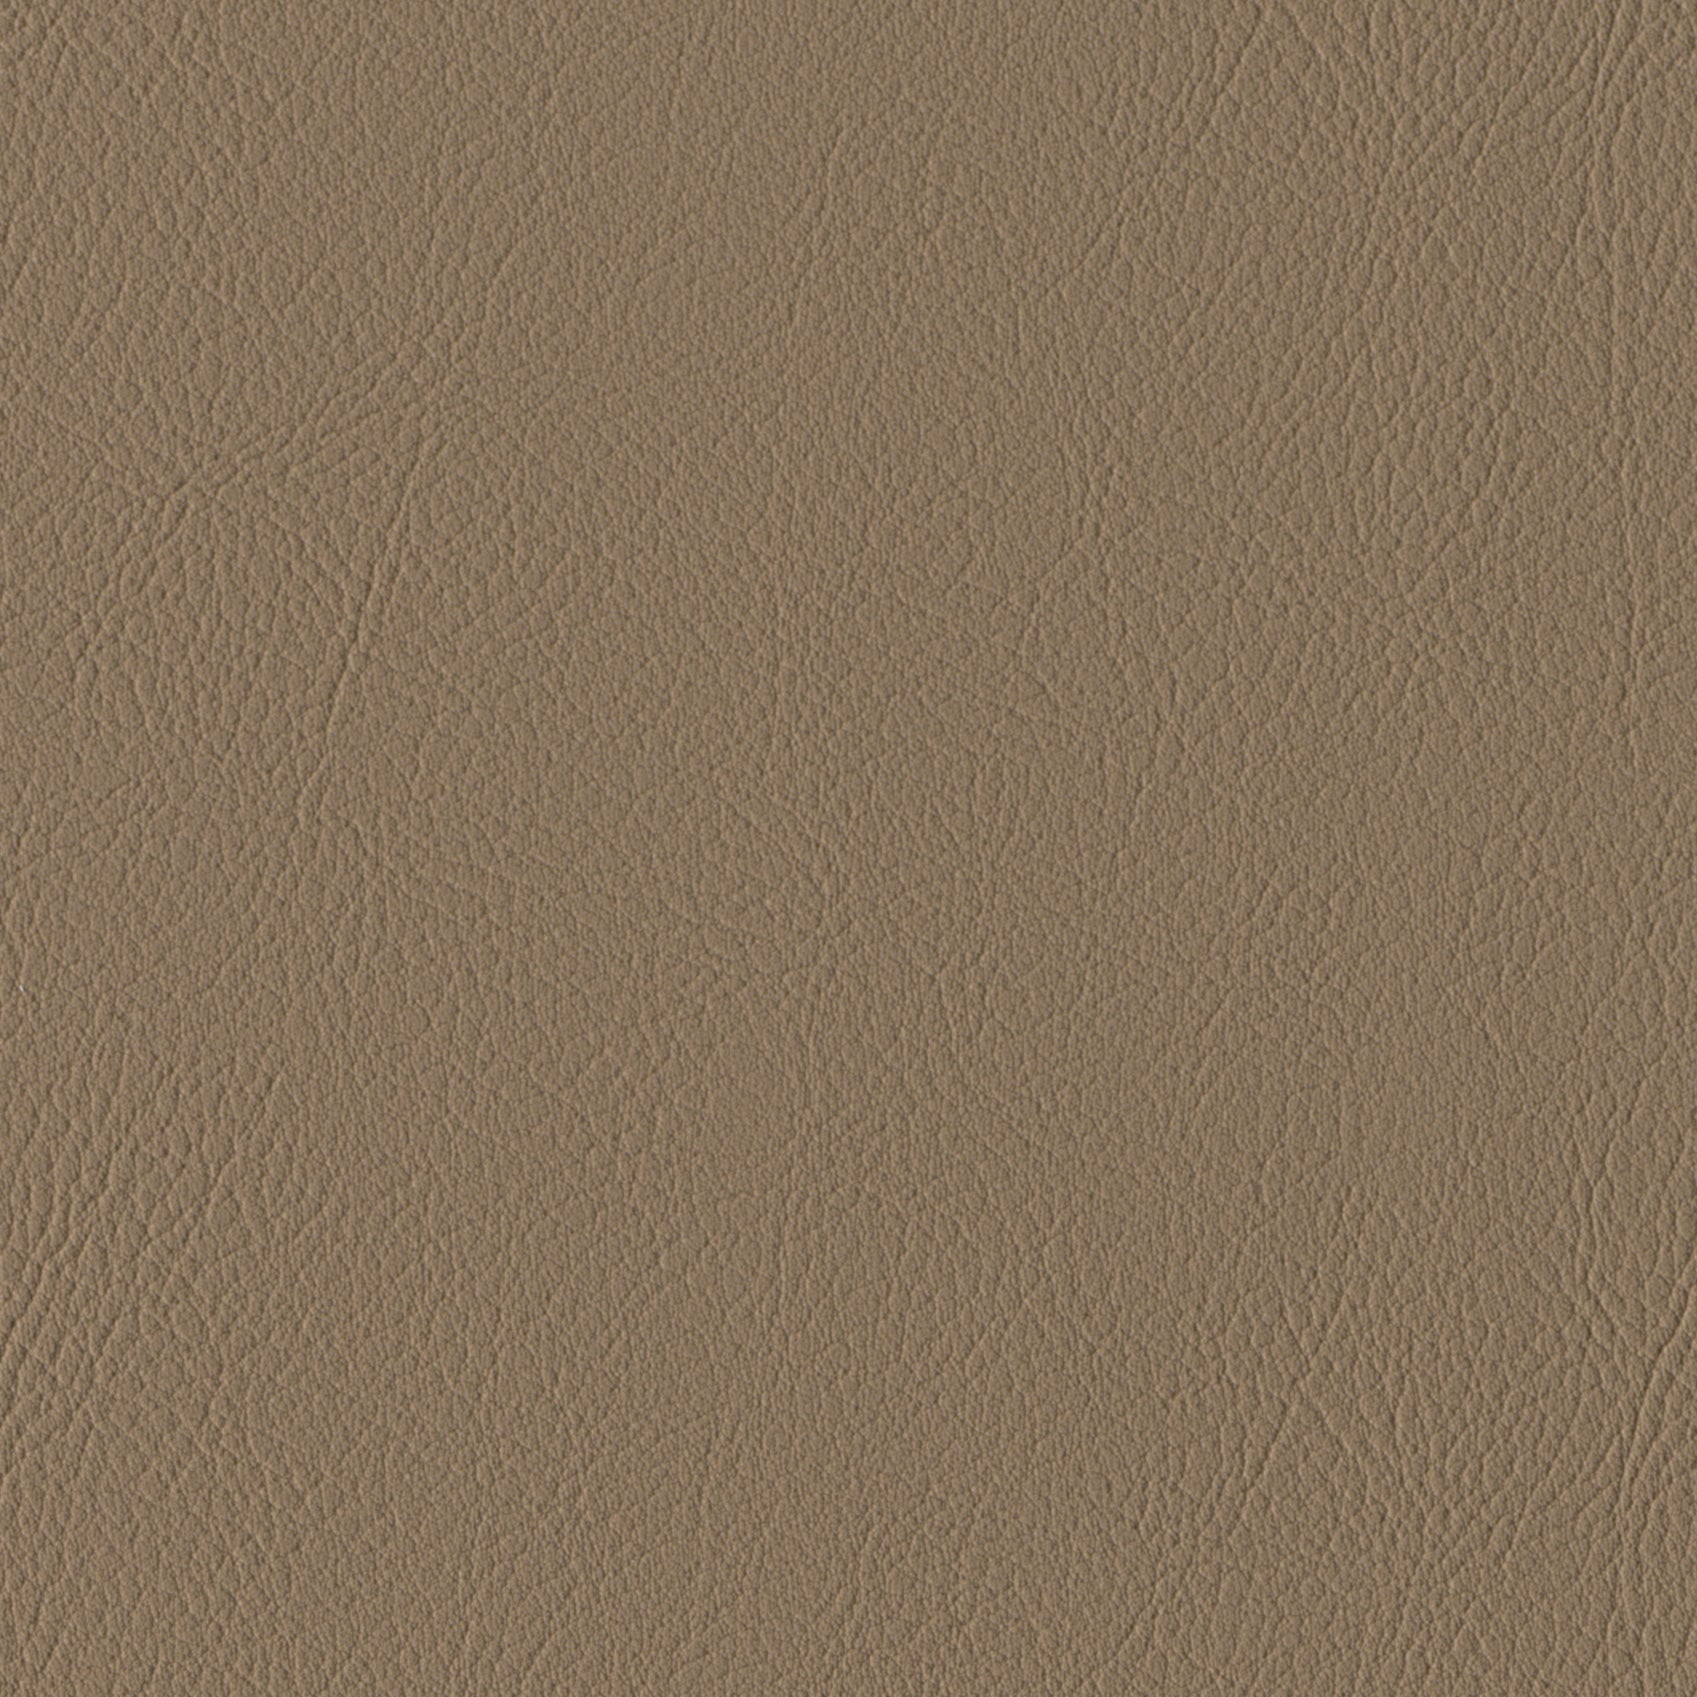    Andriali-Contract-Vinyl_Upholstery-Design-LegacyFR-Color-033Latte-Width-140cm